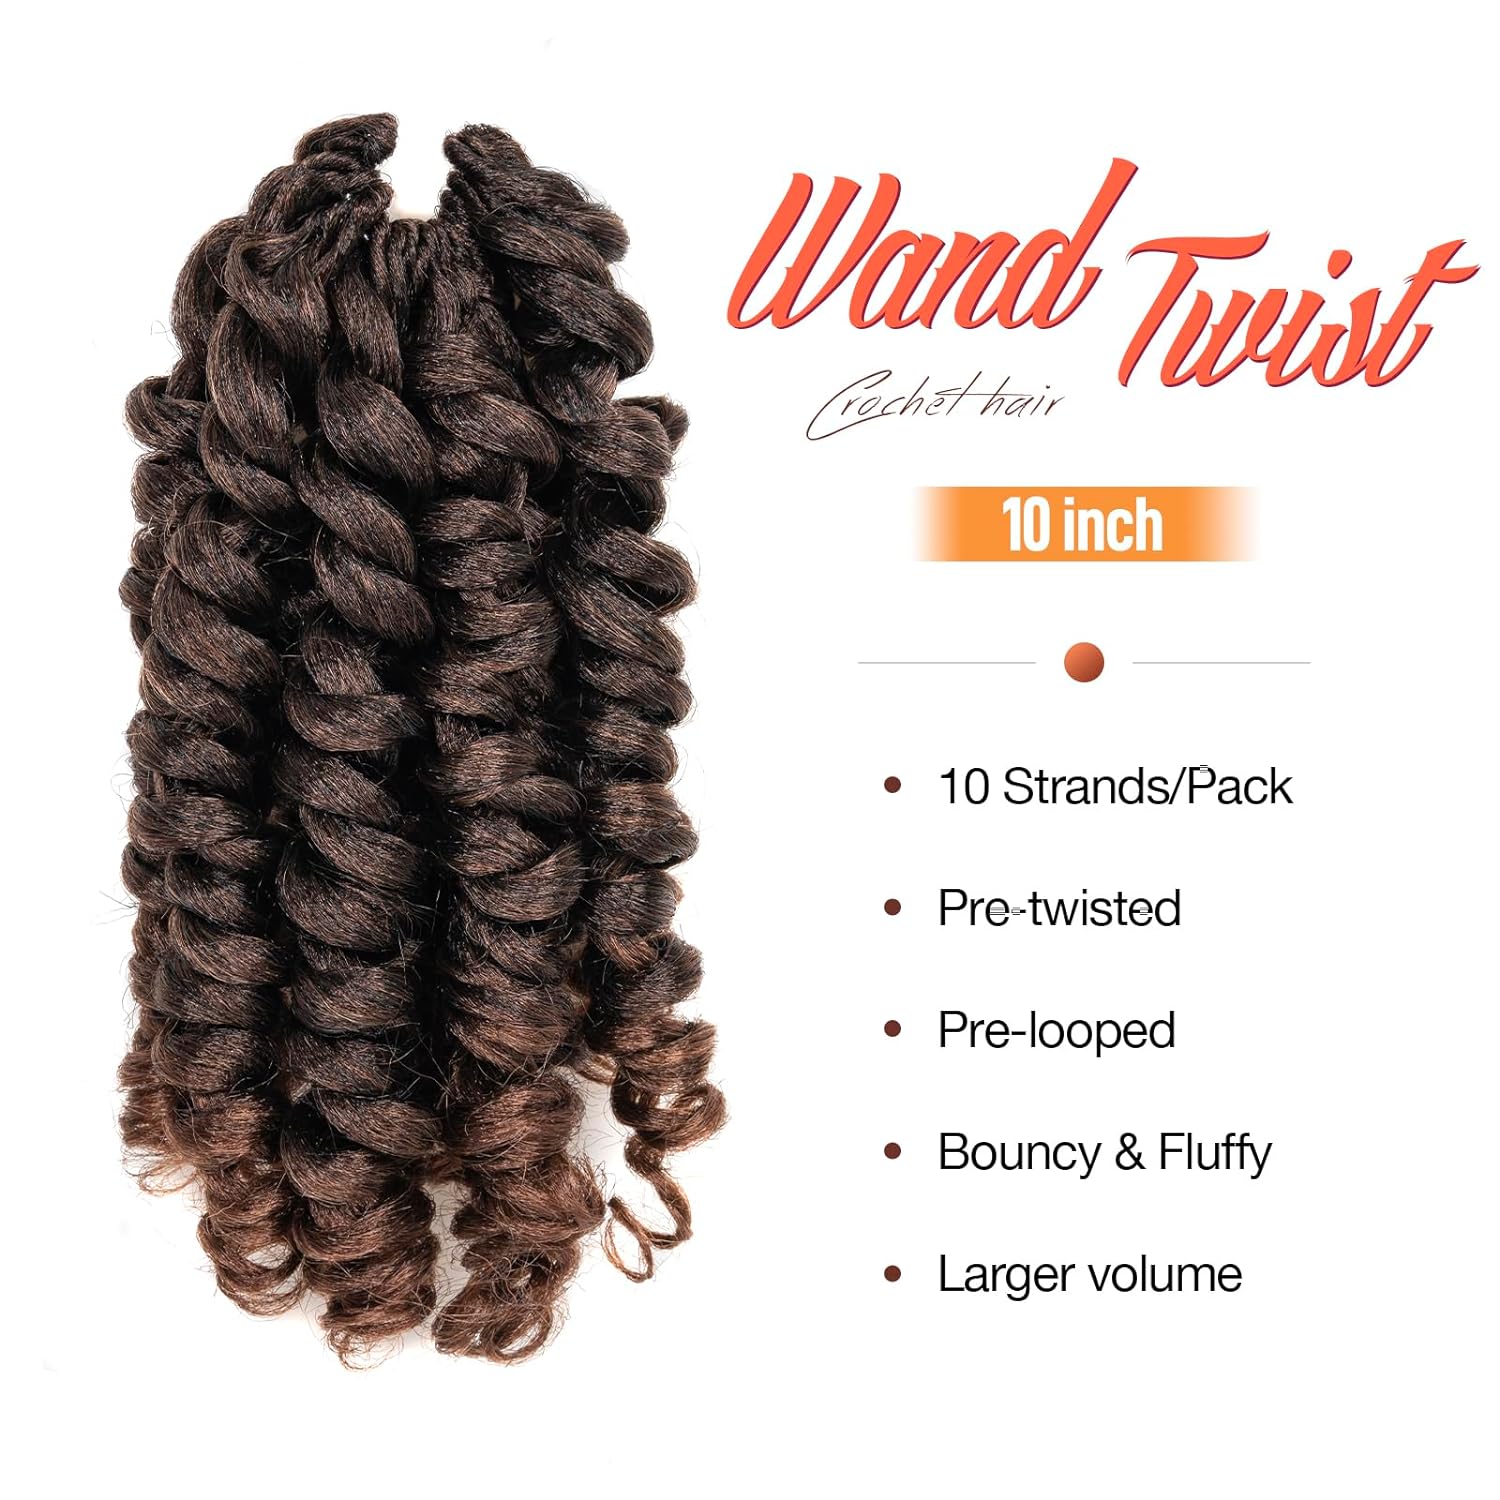 FAST SHIPPING 3-5 DAY WC | Toyotress Wand Curl Crochet Hair - 6 Inch 6 Packs Jet Black Jamaican Bounce Crochet Hair, Short Bob Curly Crochet Braids Bouncy Curls Synthetic Braiding Hair Extensions (6 Inch, 1-6P)